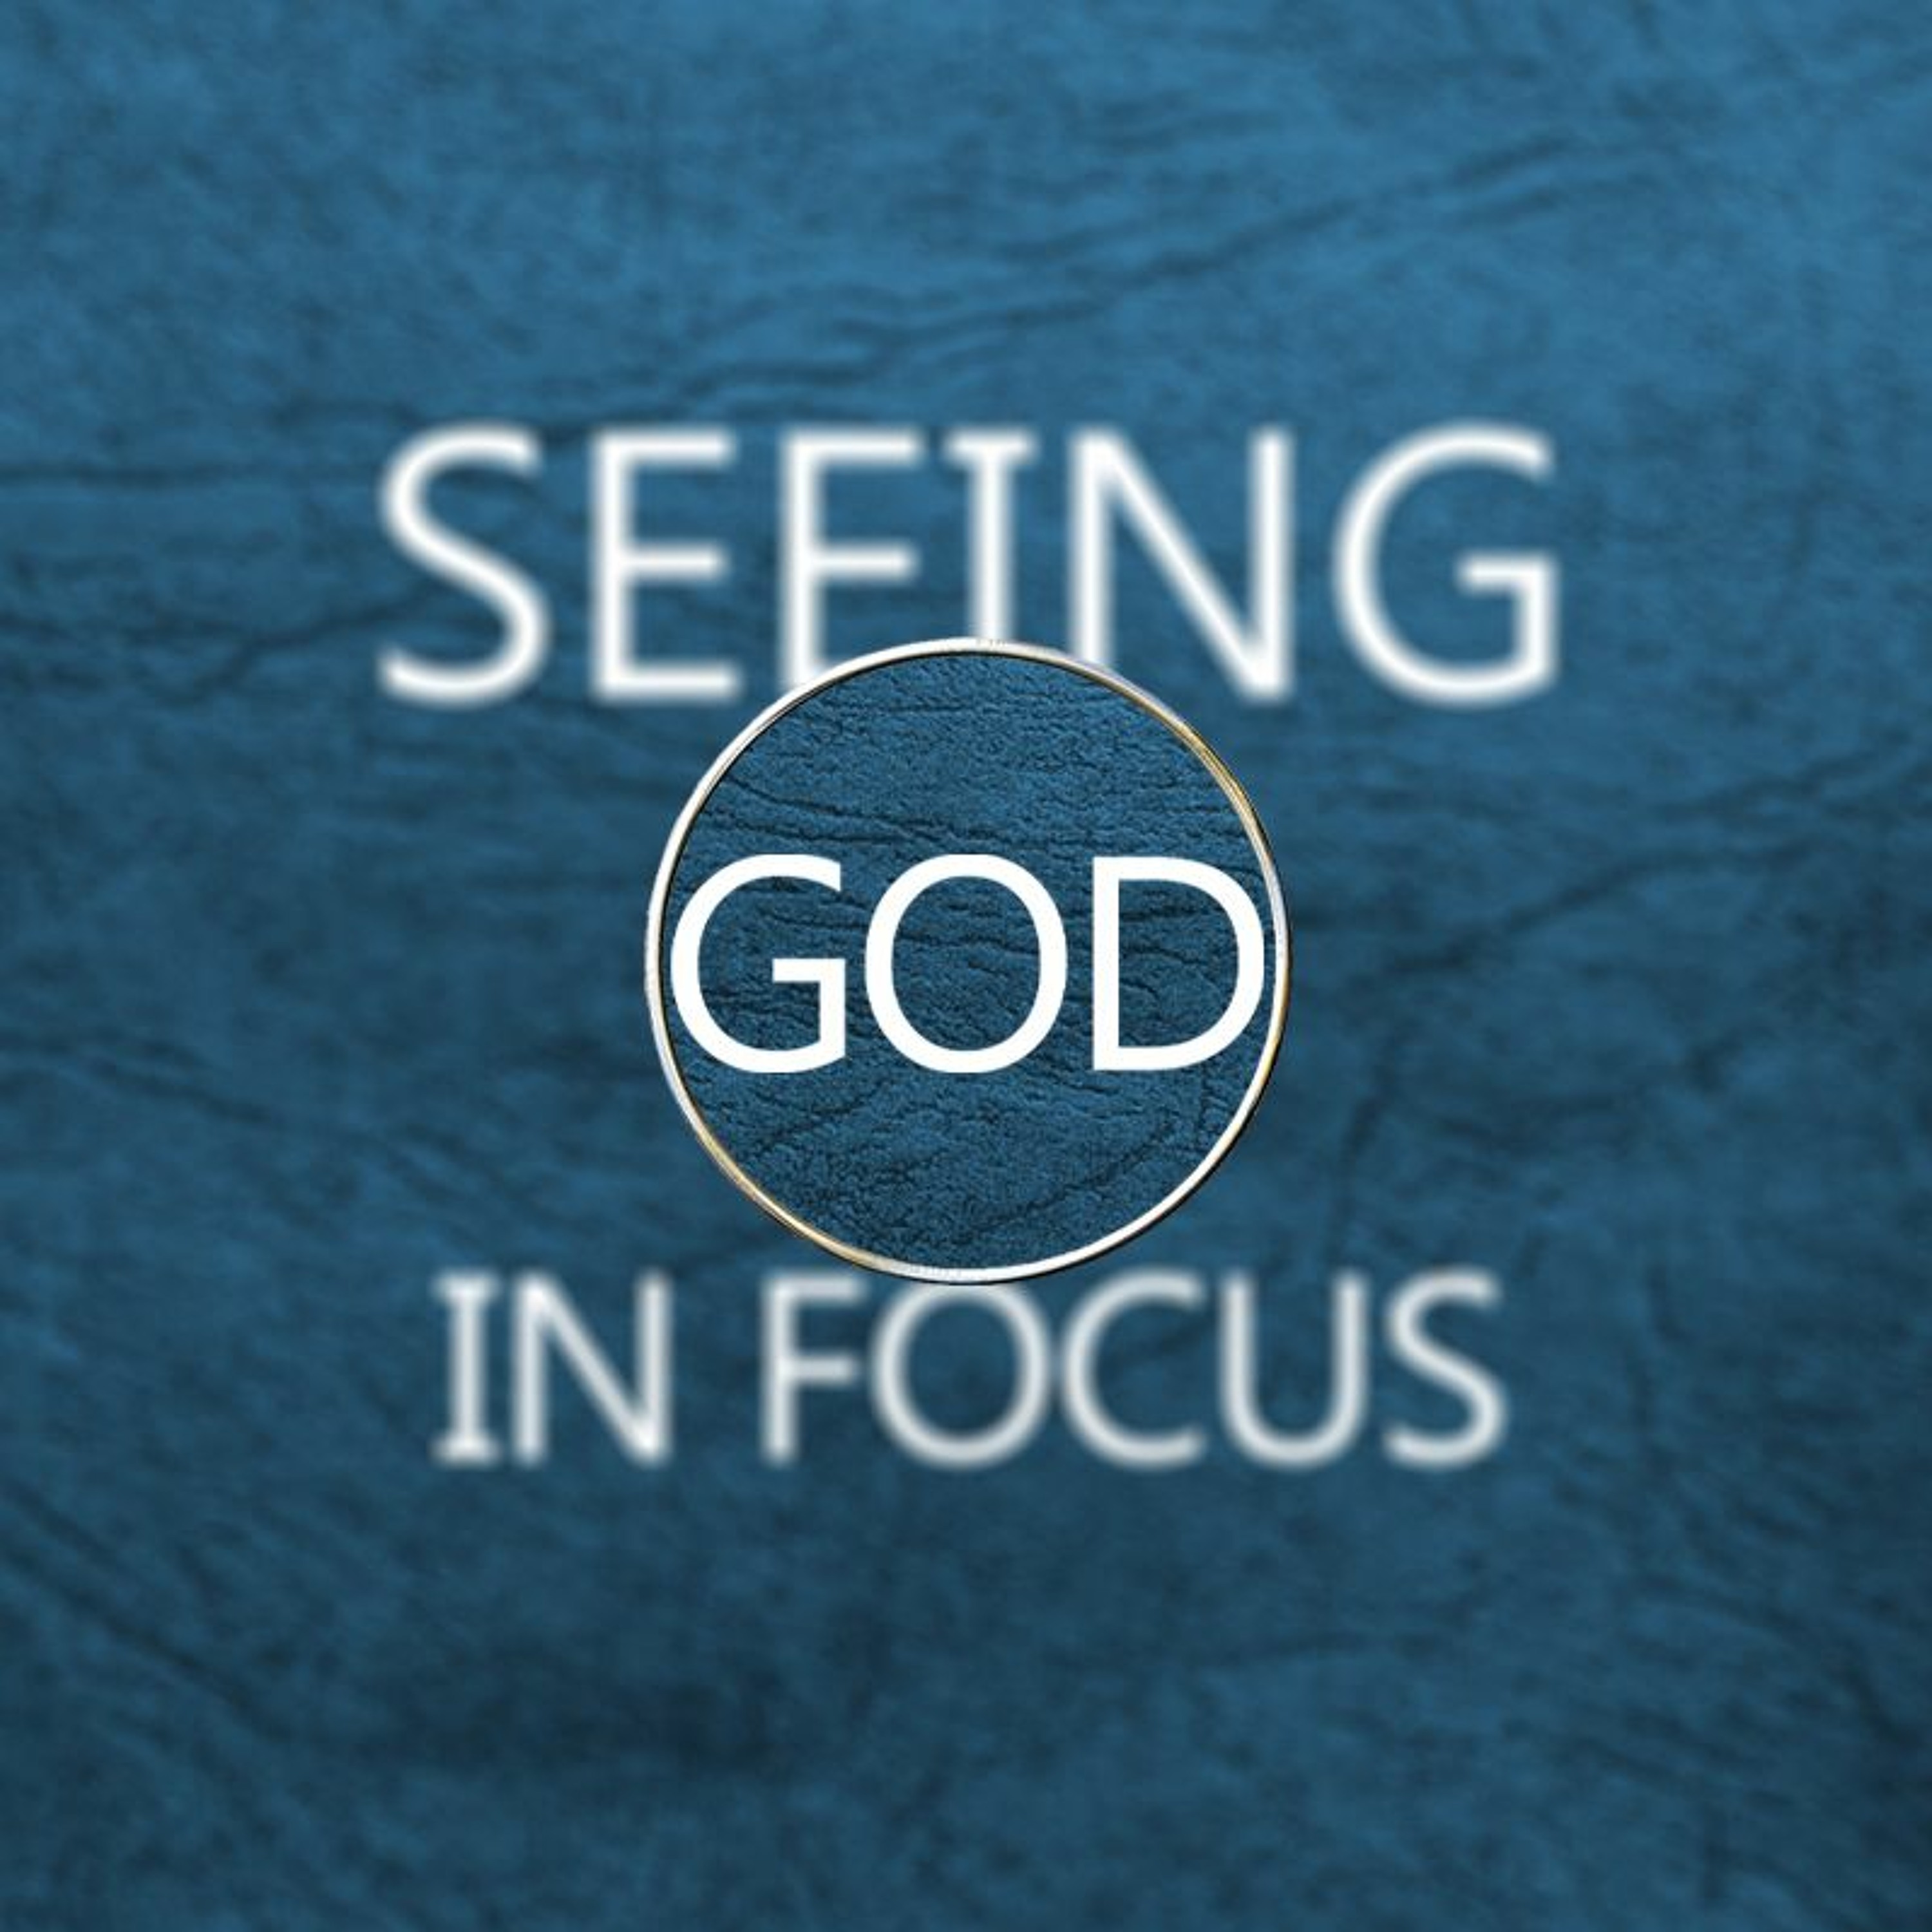 Seeing God in focus | Who we are